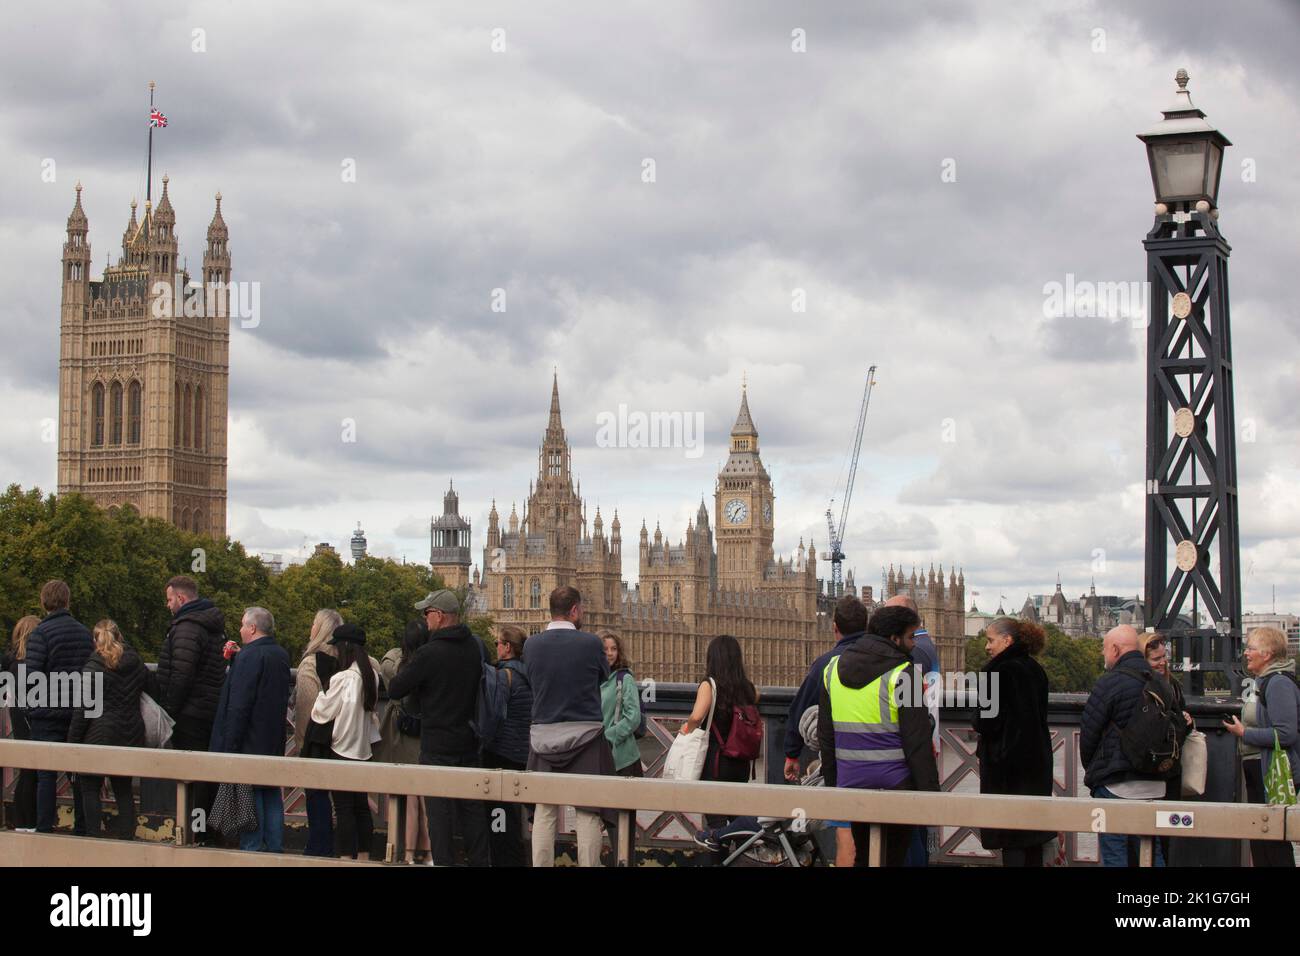 London, UK, 18 September 2022: Mourners queue on Lambeth Bridge to pay their respects to the late monarch Queen Elizabeth II, whose funeral takes place tomorrow. The queue for admission to Westminster Hall has now closed in order for all of those already in the queue to pass through before 6.30am tomorrow morning. Anna Watson/Alamy Live News Stock Photo